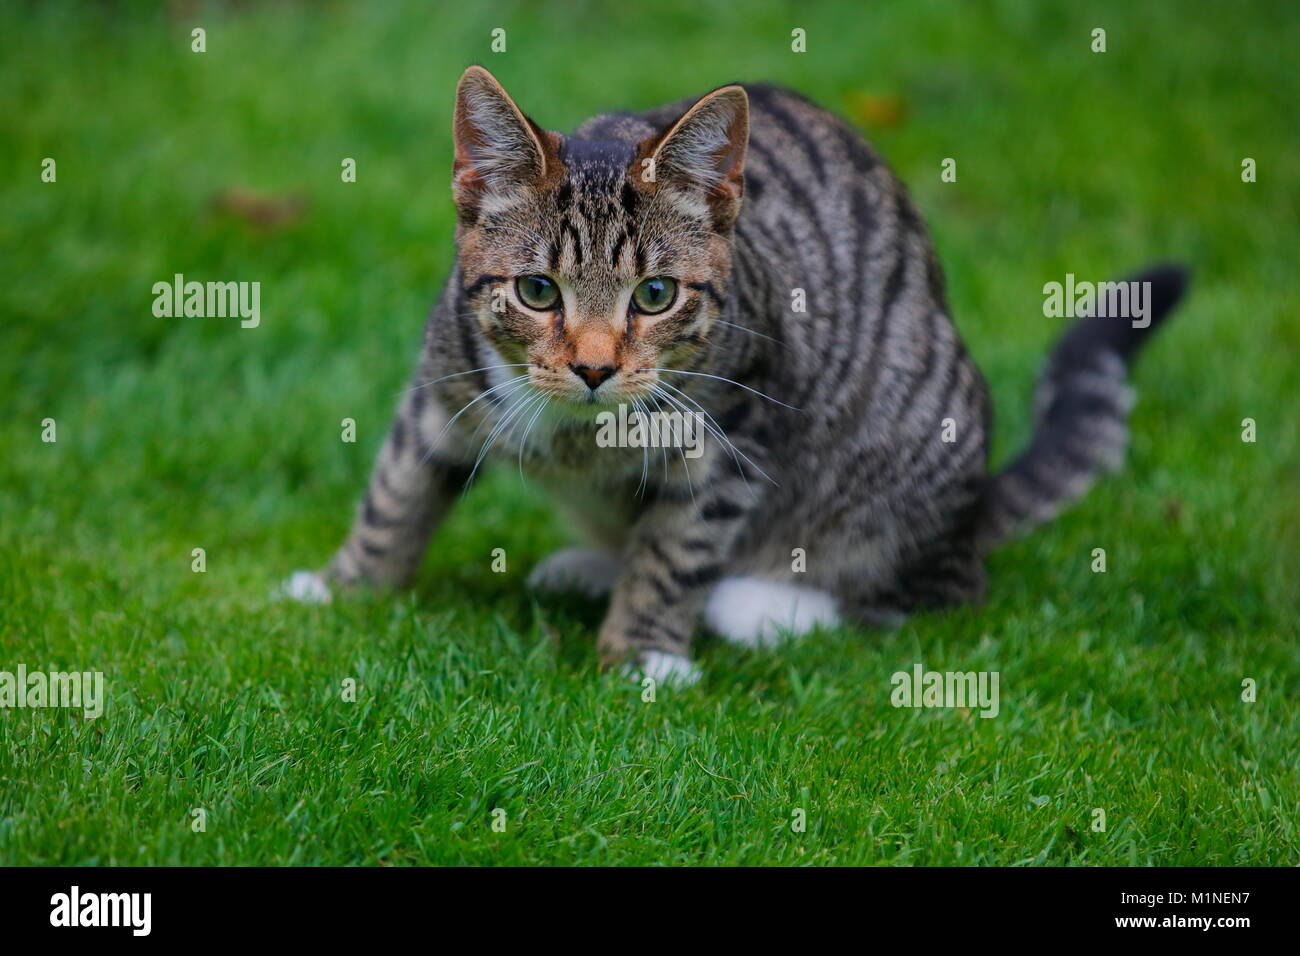 Our Pet cat Mylo  moments after being startled Stock Photo